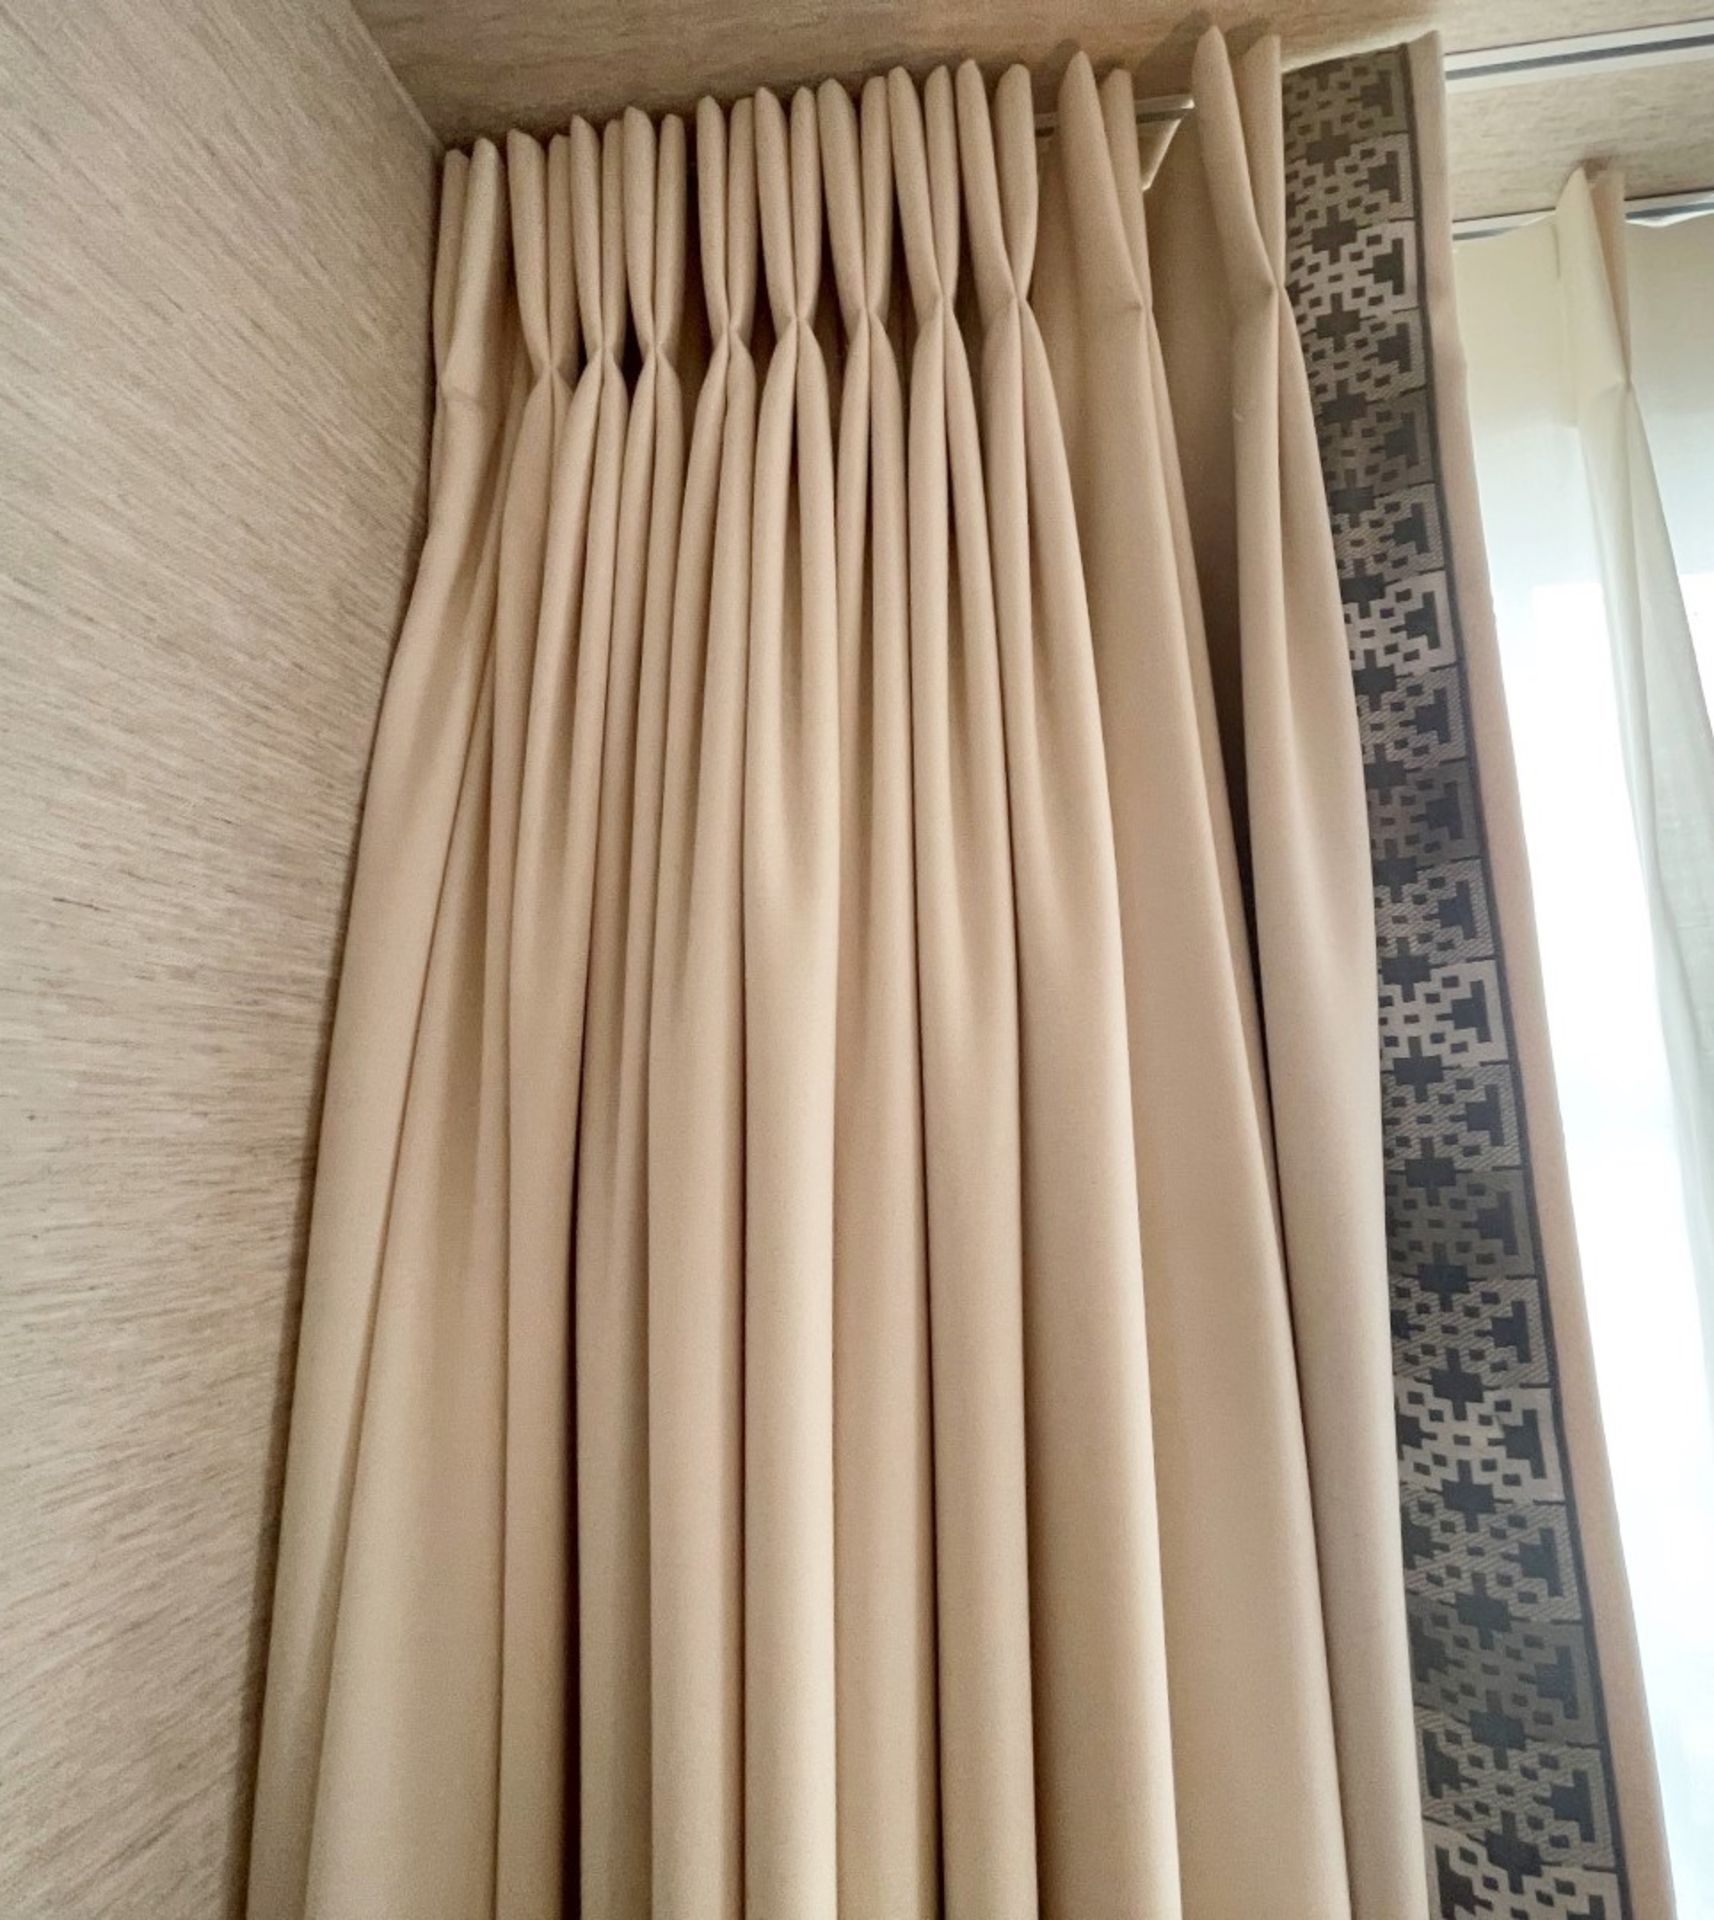 4 x Bespoke Made To Measure Premium Lined Curtains - Includes 1 x Pair & 2 x Single Blinds + Voiles - Image 5 of 13